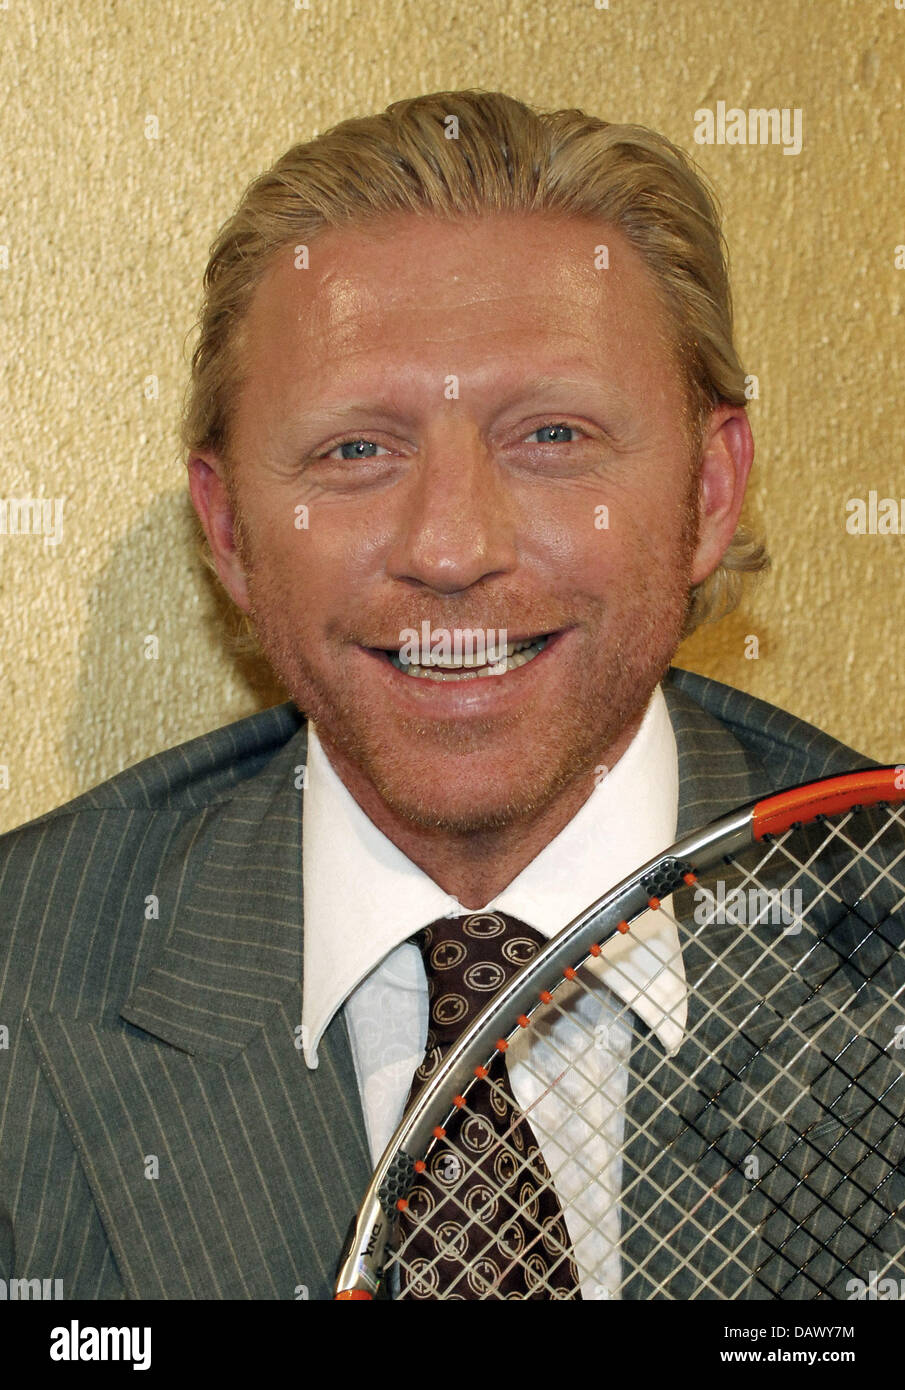 Former tennis pro Boris Becker poses with a racket during the presentation of the new 'Boris Becker' (BB) tennis collection in Hamburg, Germany, 14 May 2007. The BB collection includes bags, rackets and functional sportswear. A serving tennis player, to remind of the strengths of threefold-Wimbeldon-winner Becker, functions as the collection's logo. Photo: Wolfgang Langenstrassen Stock Photo